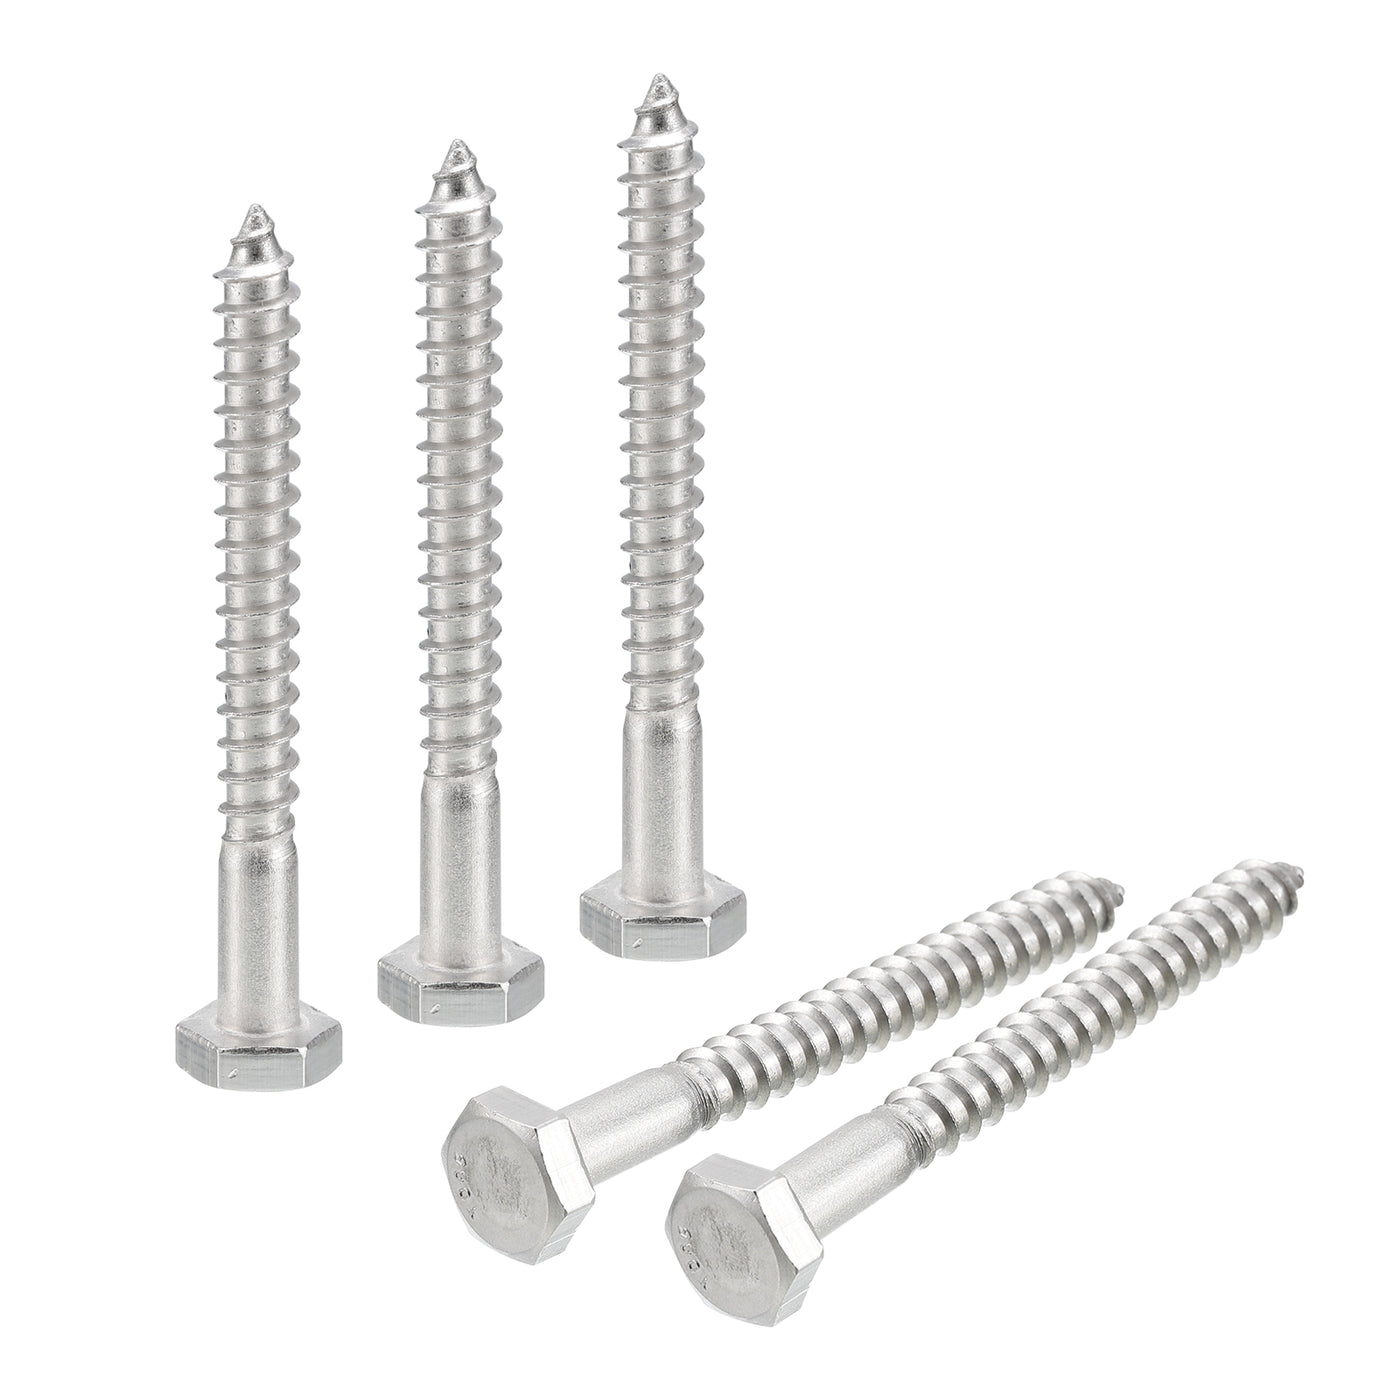 uxcell Uxcell Hex Head Lag Screws Bolts, 10pcs 1/4" x 2-1/2" 304 Stainless Steel Wood Screws